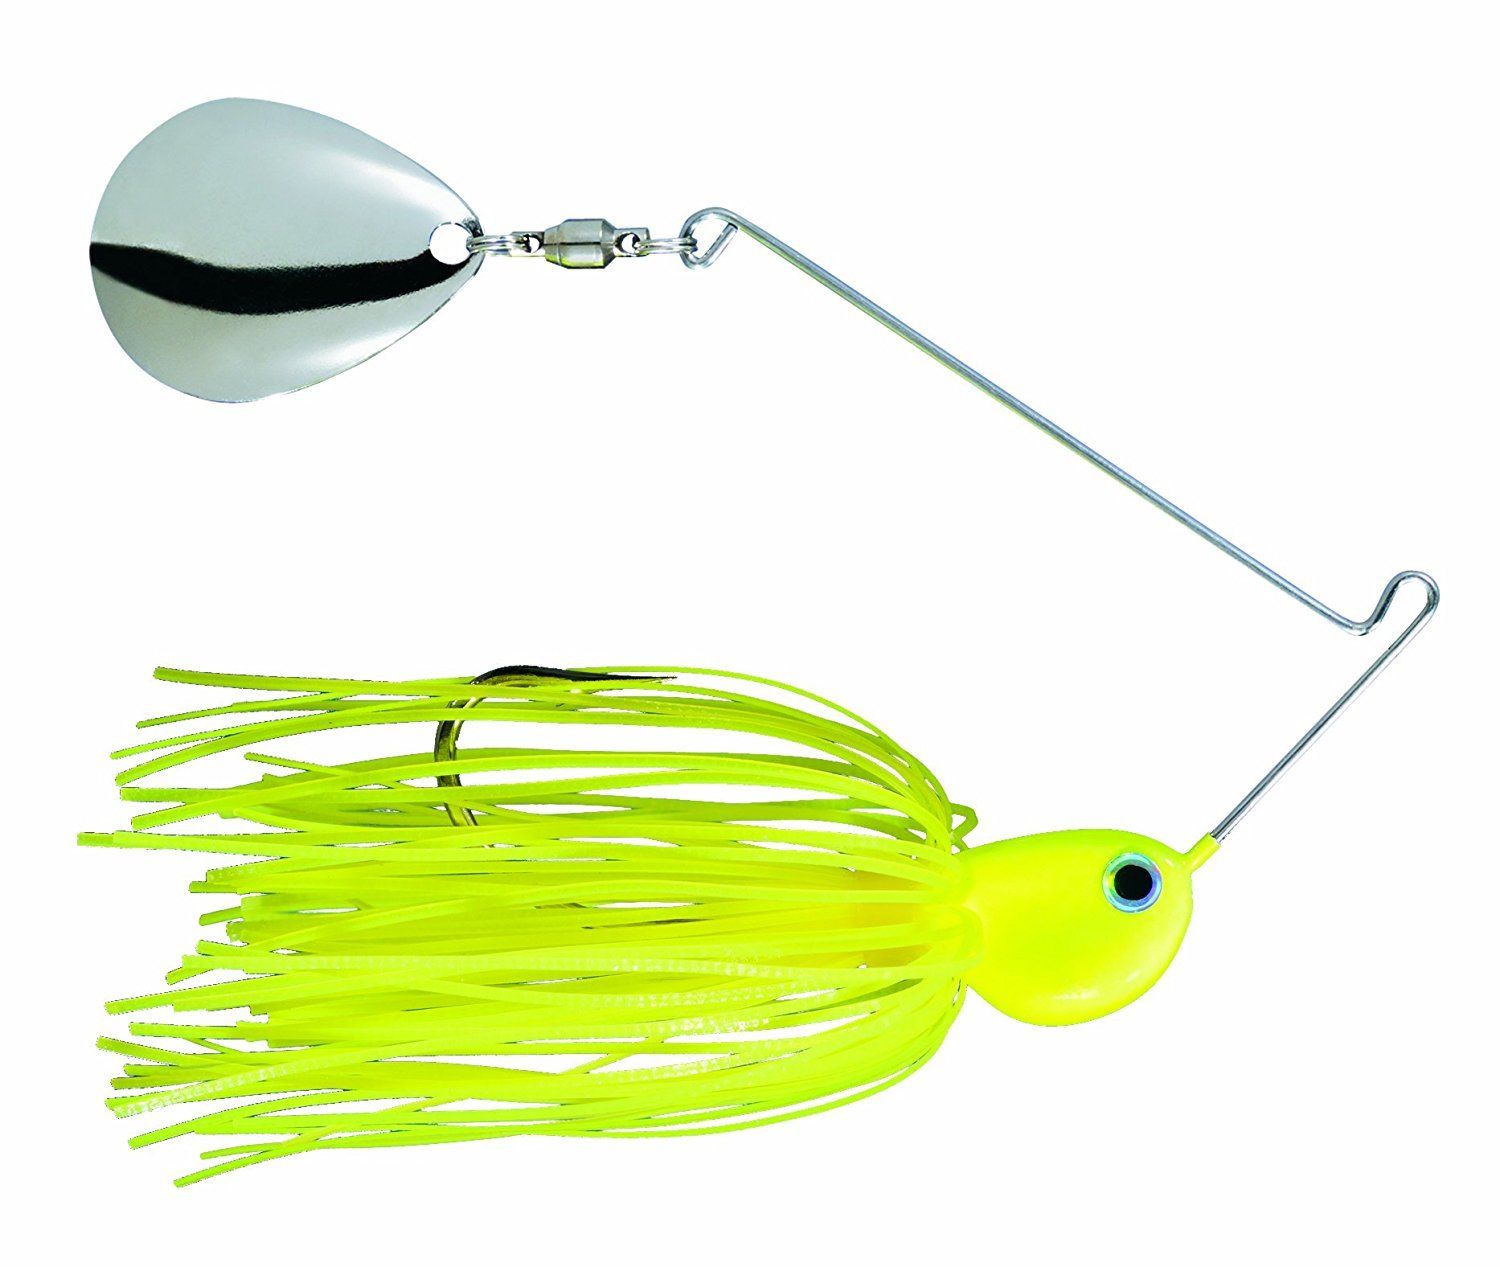 Strike King Potbelly Spinner Bait (Chartreuse, 3/8oz) Colorado Blades Lure